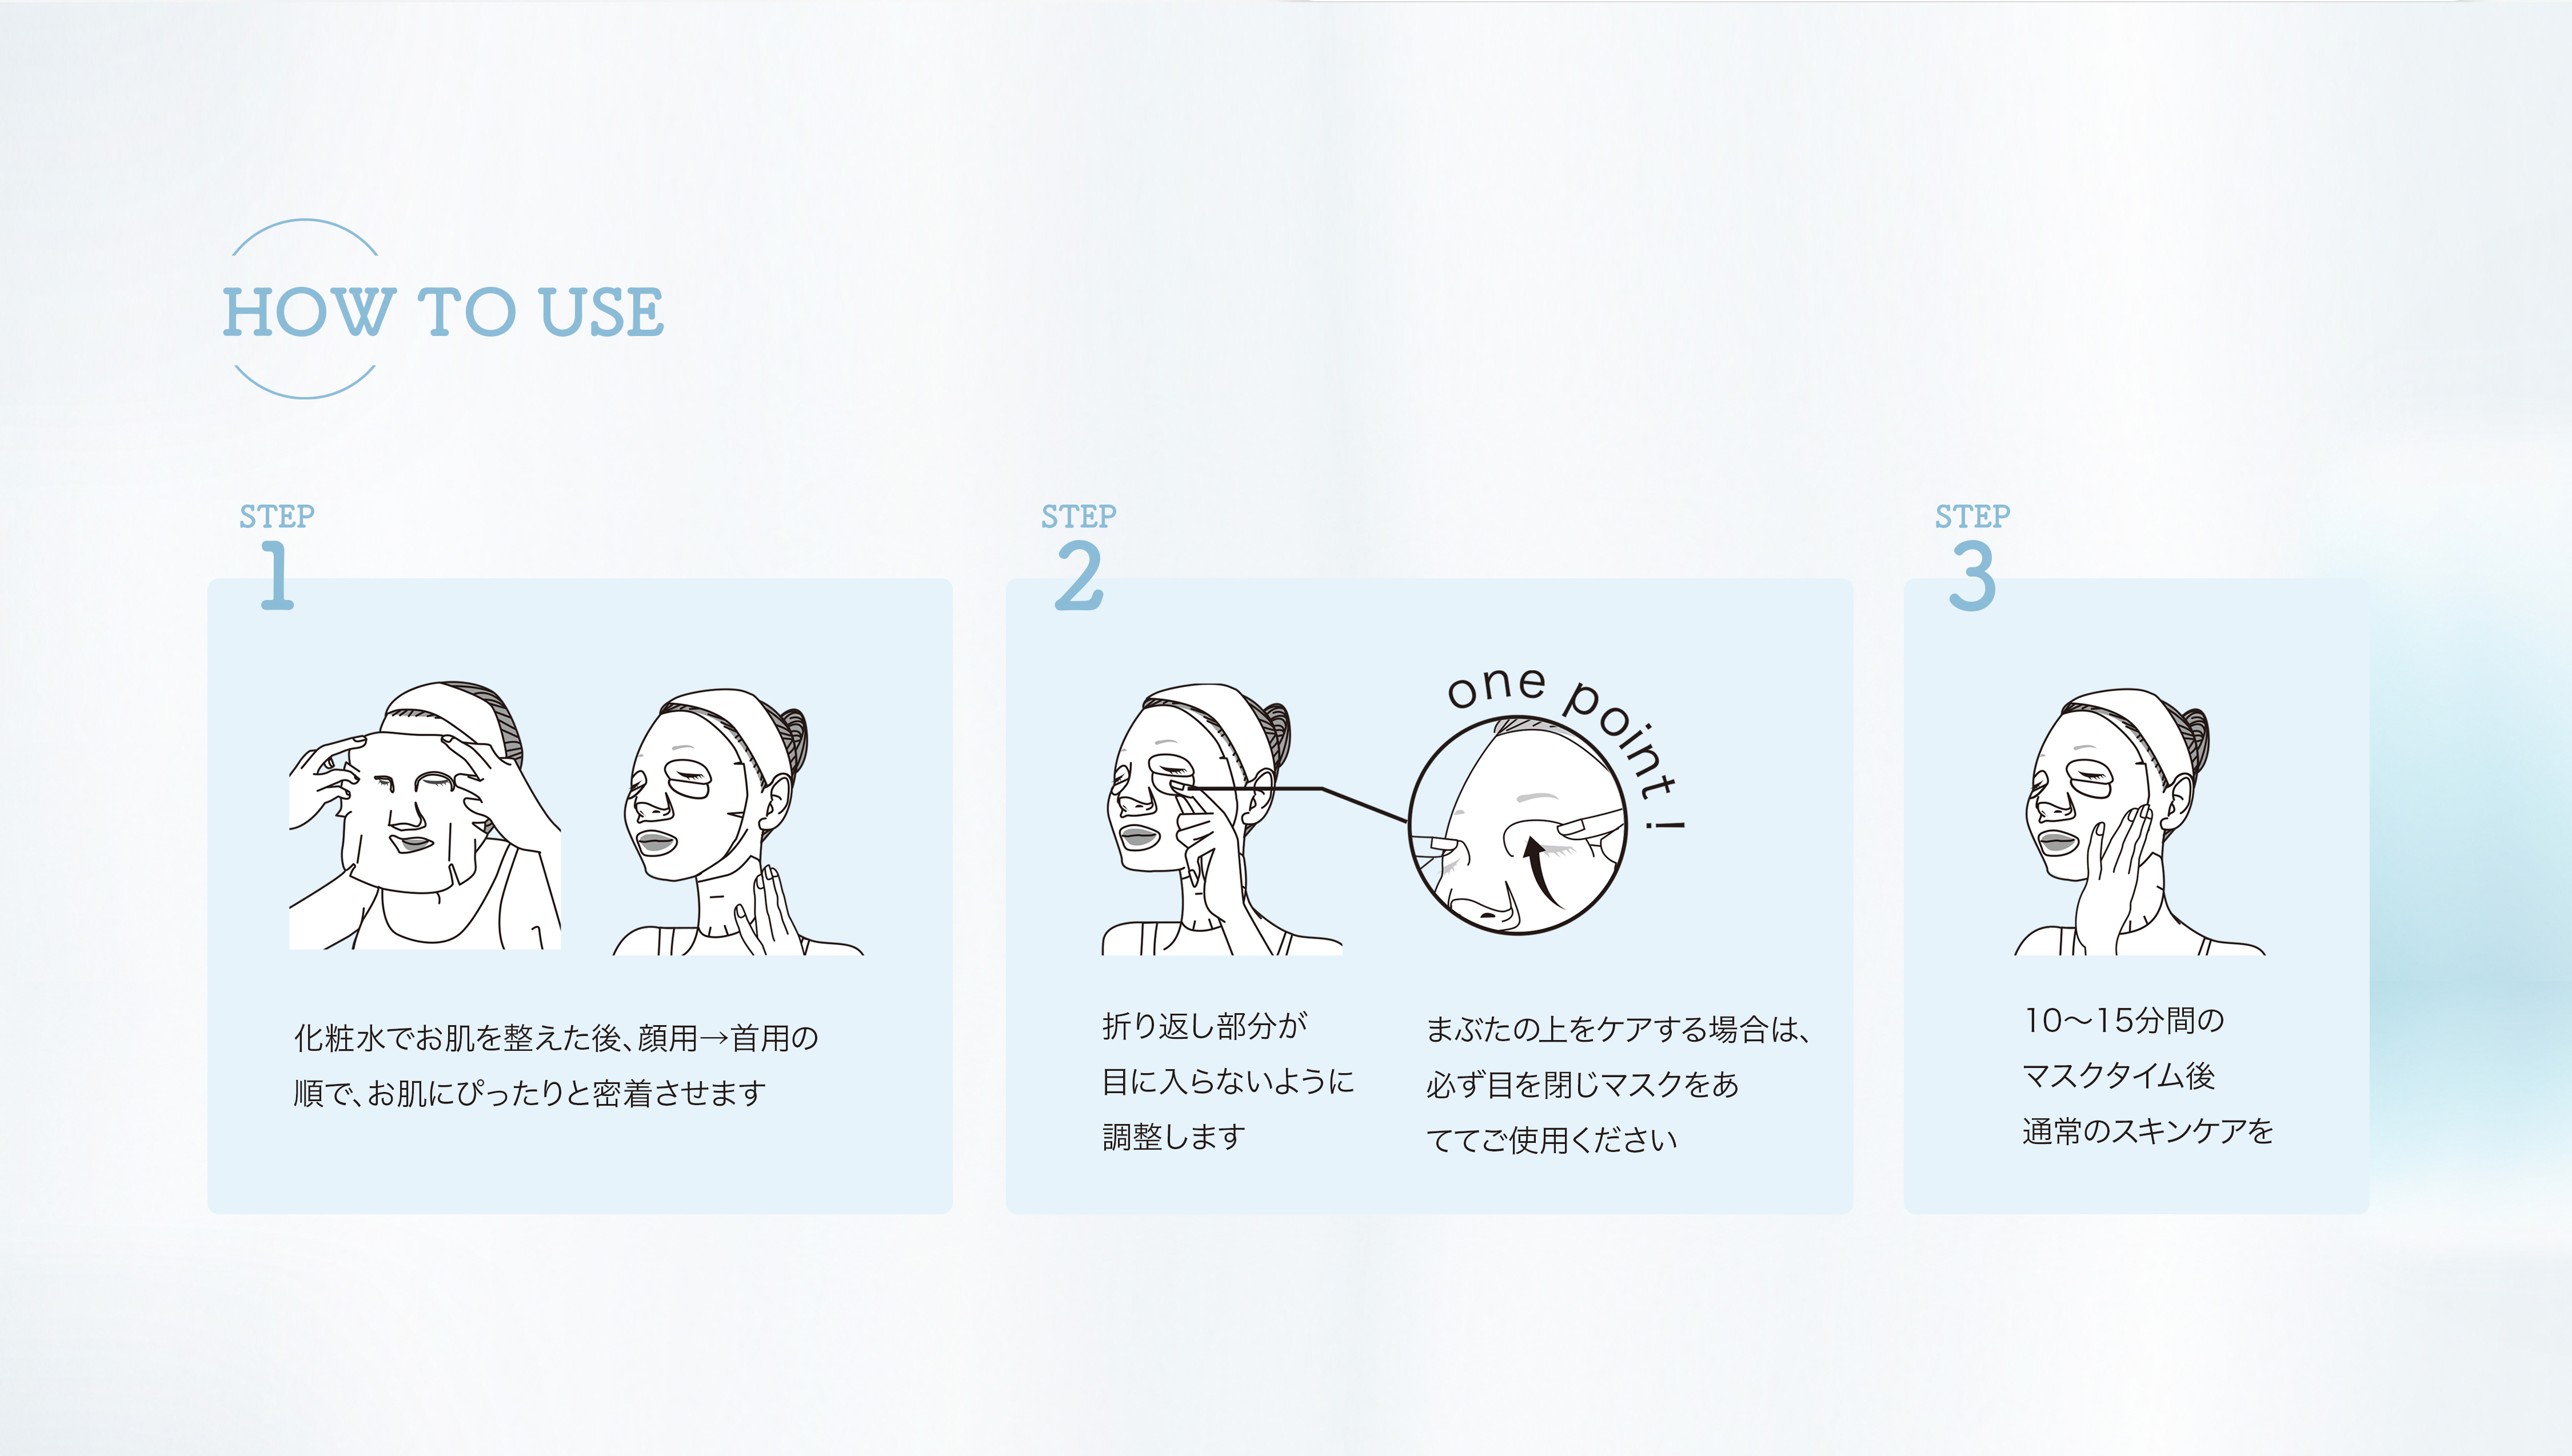 How To Use 使い方の説明です。